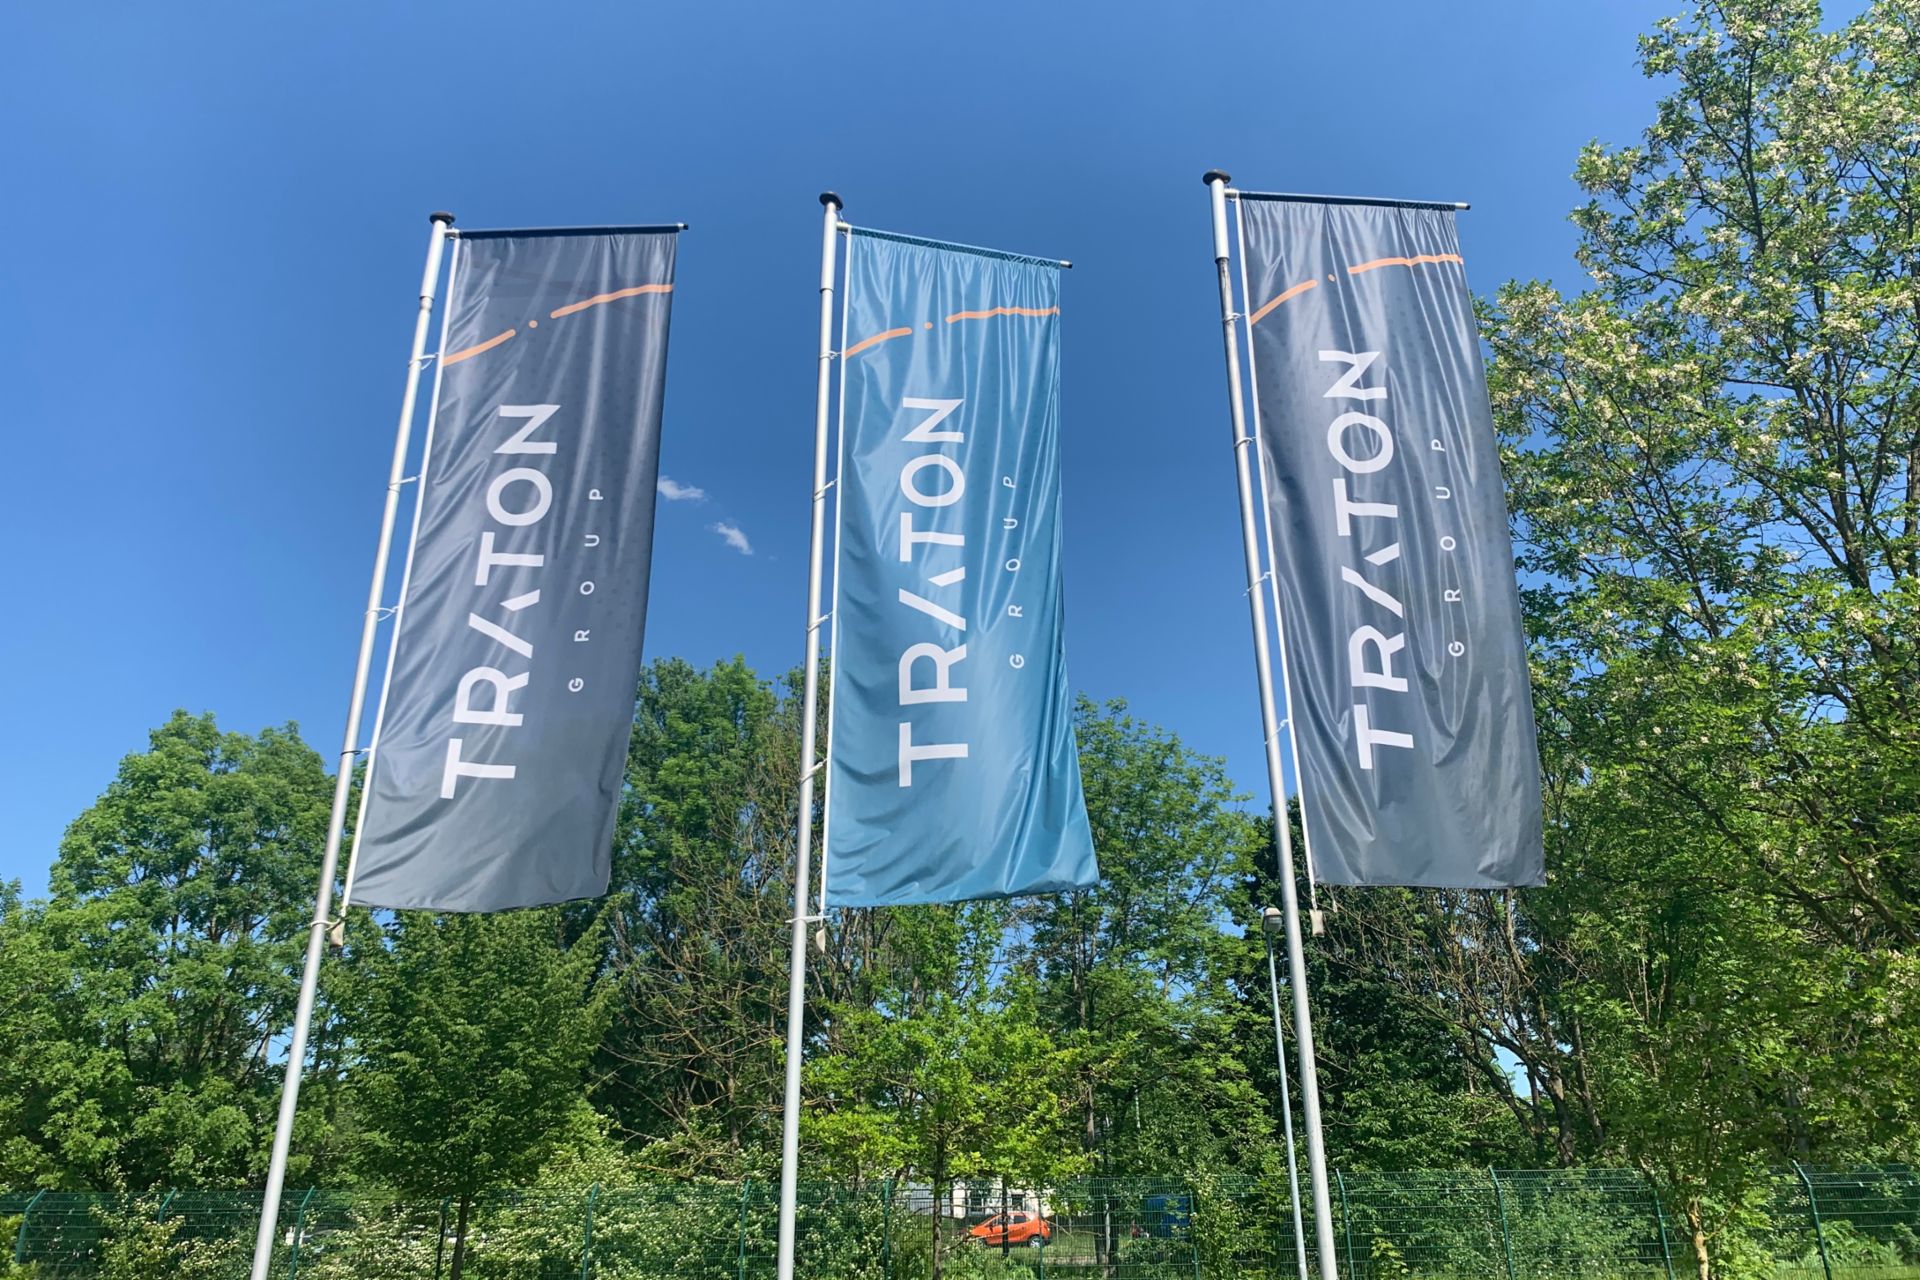 Three flags on the mast with TRATON logo
                 